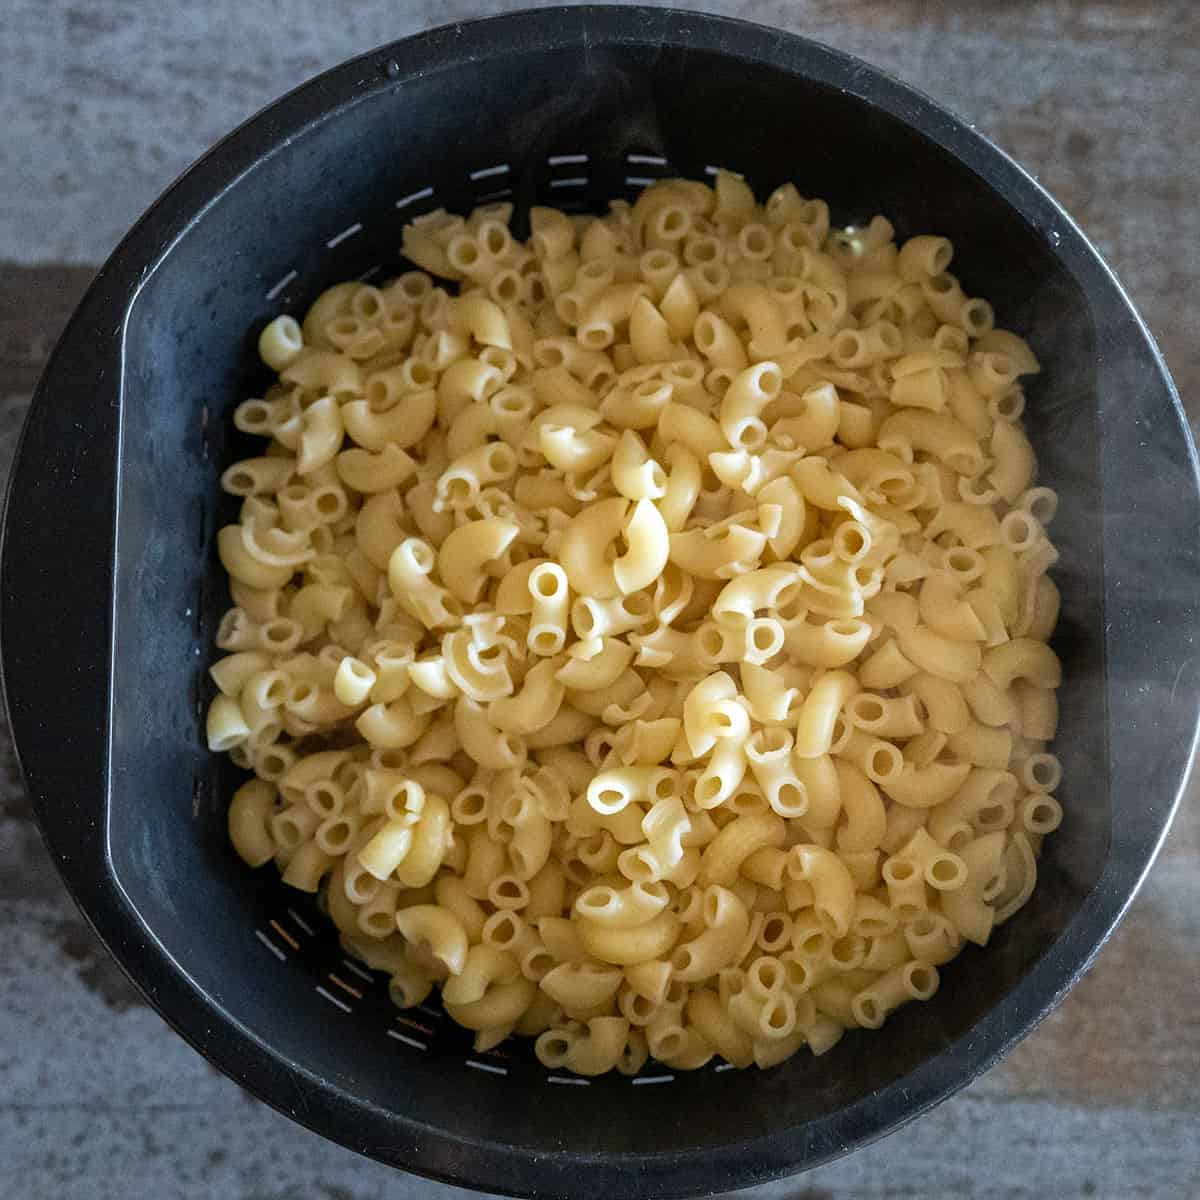 macaroni noodles draining in a colander.